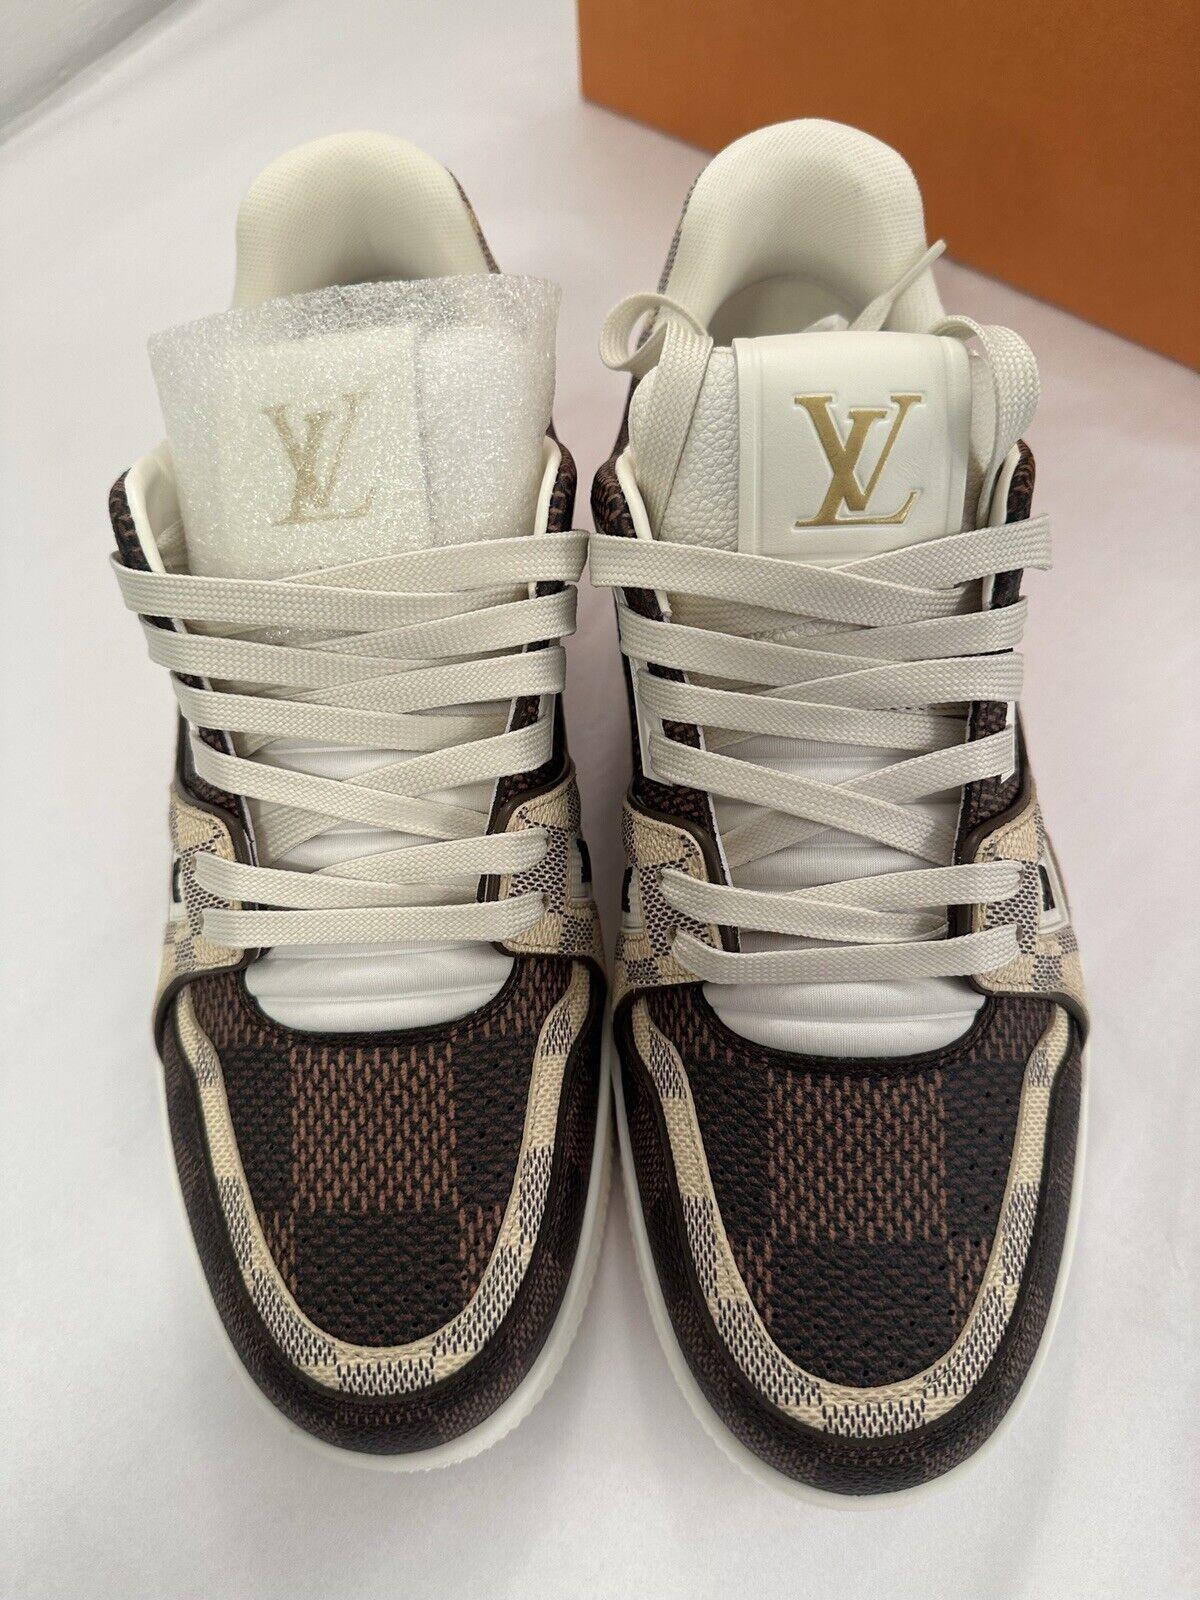 Louis Vuitton, Shoes, Louis Vuitton Mens Nigo Lv Trainer Sneakers Limited  Edition Printed Leather